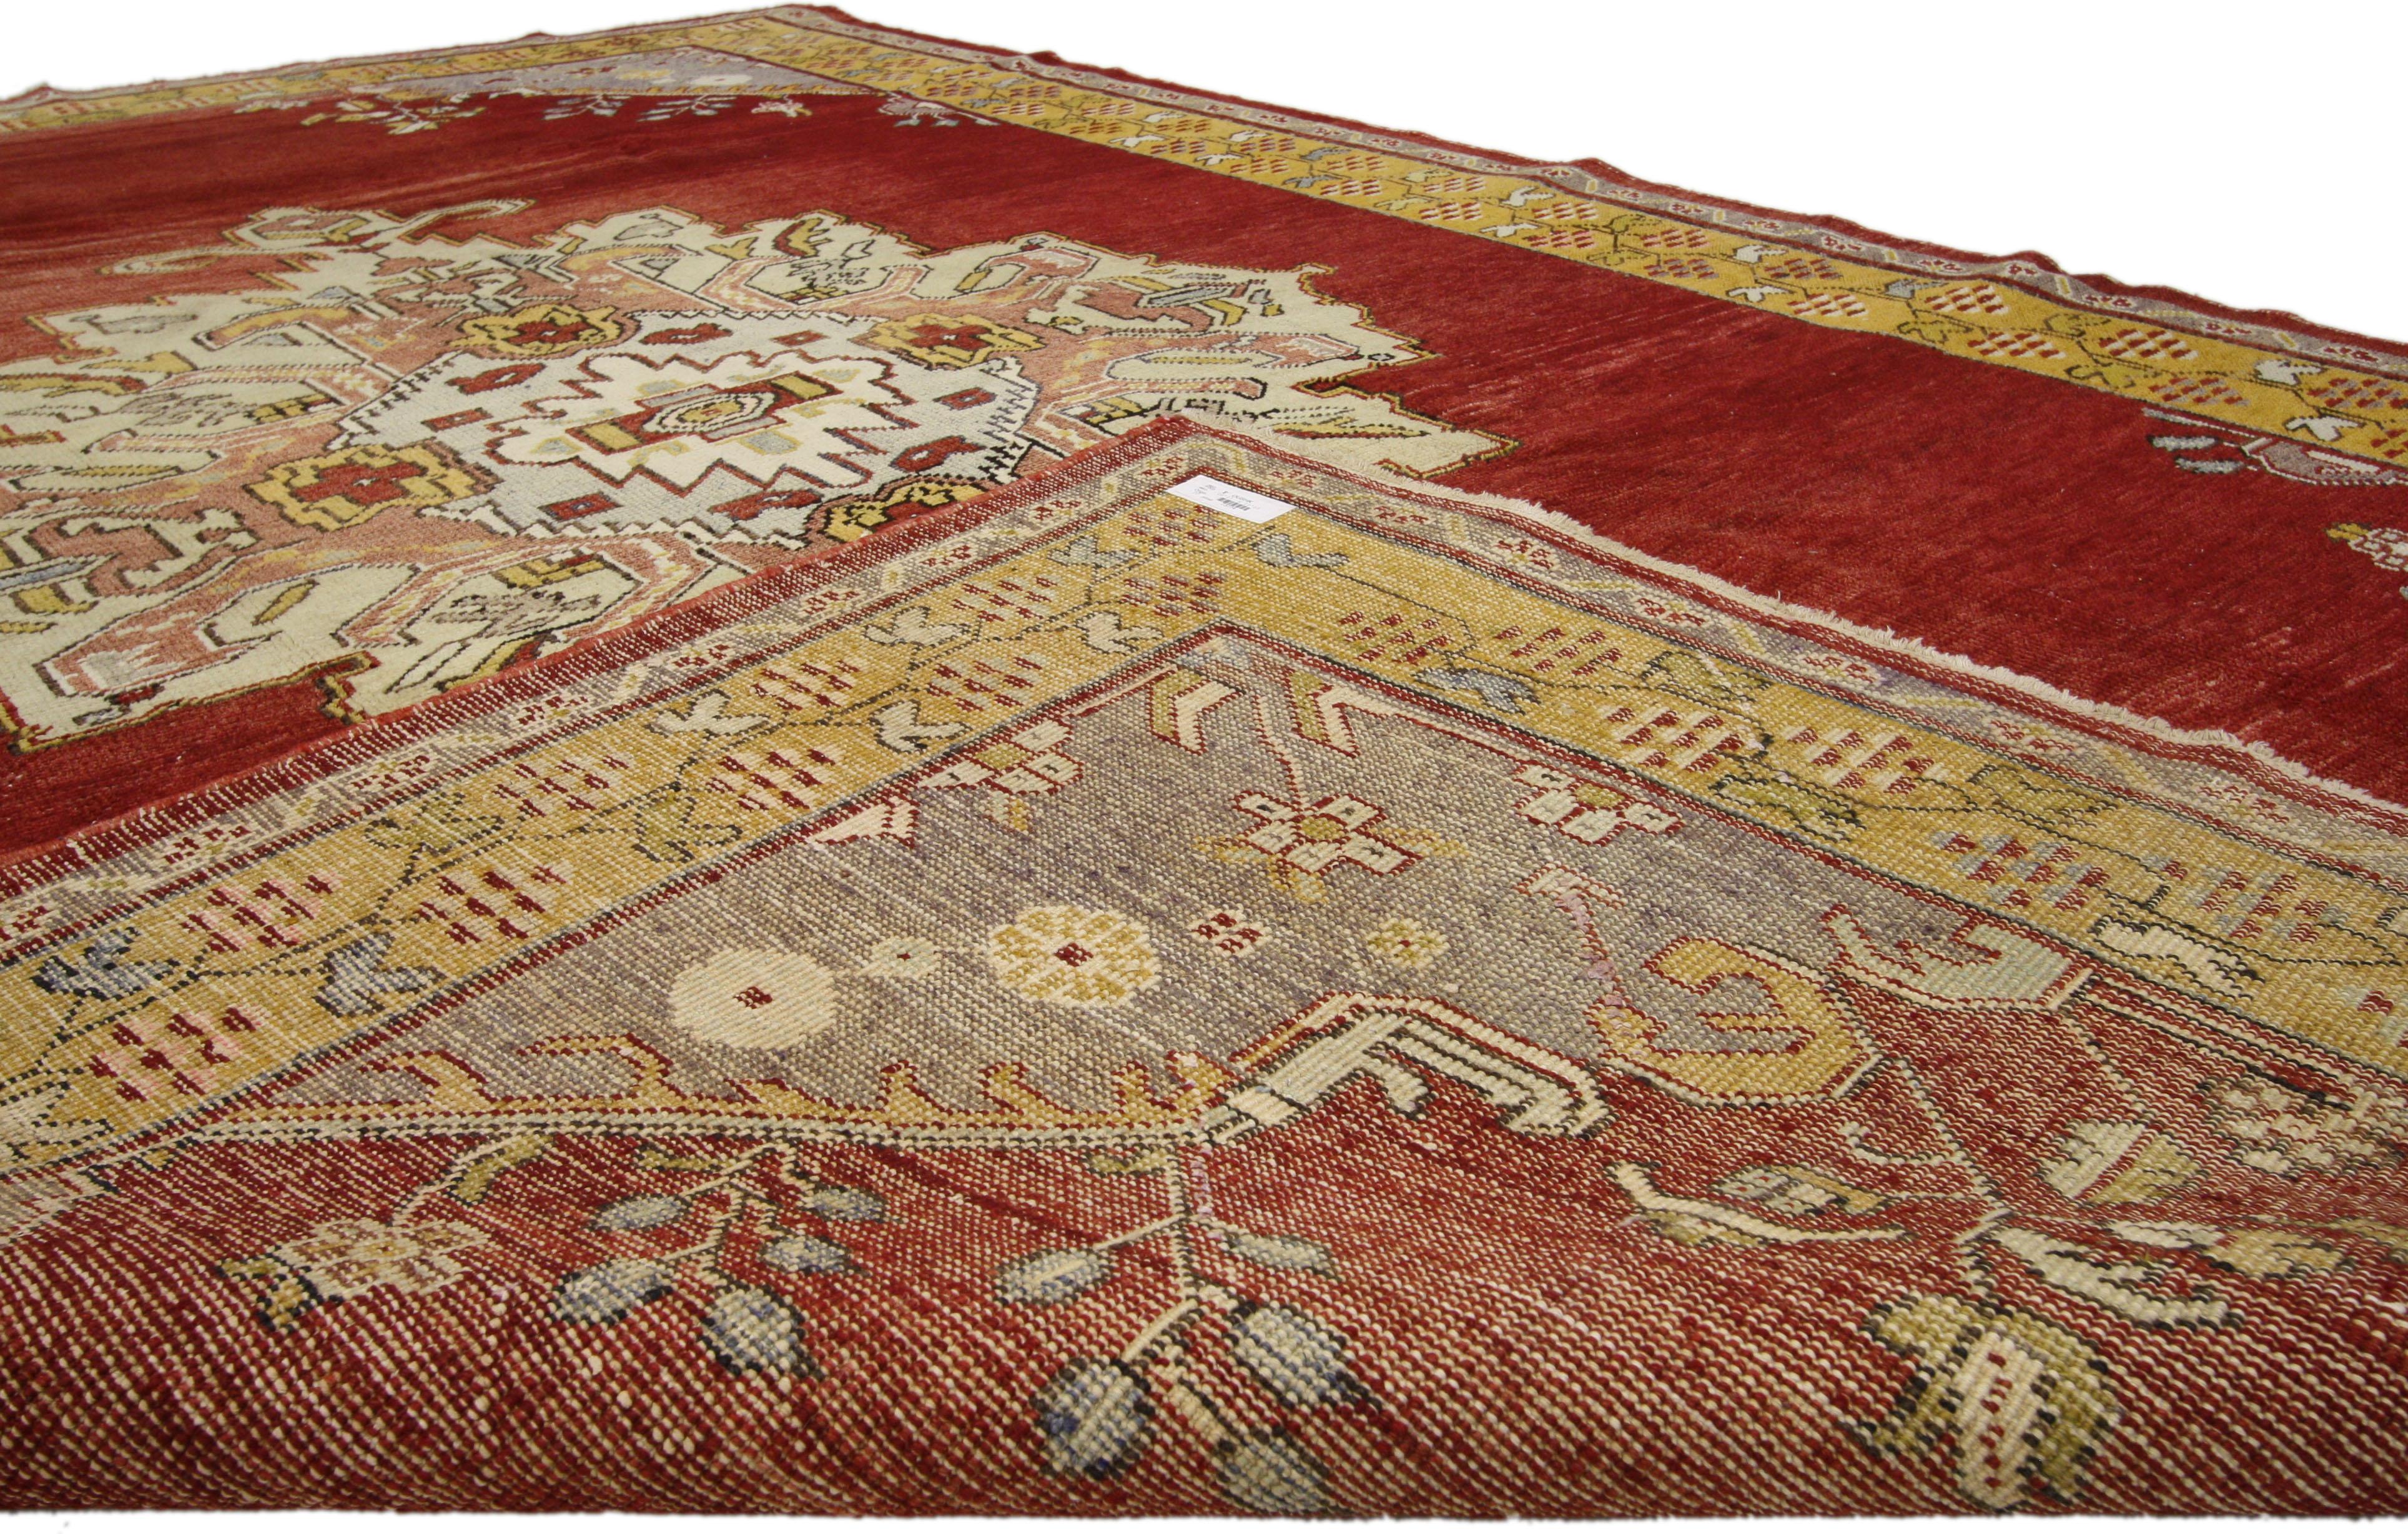 Vintage Turkish Oushak Rug with Regency Queen Anne Style and Vibrant Colors In Good Condition For Sale In Dallas, TX